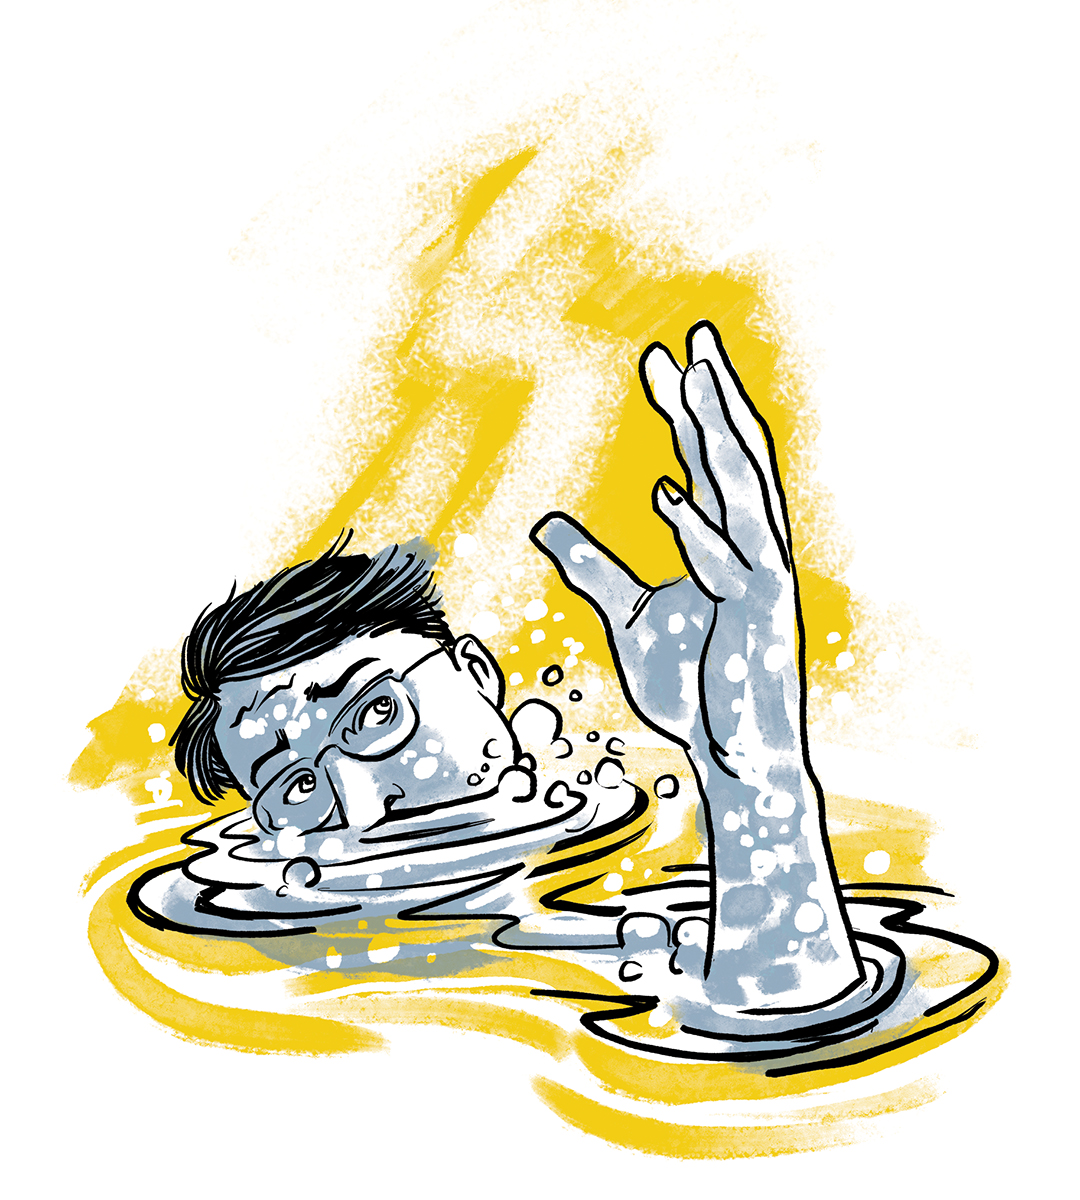 The author drowning in a hot pot